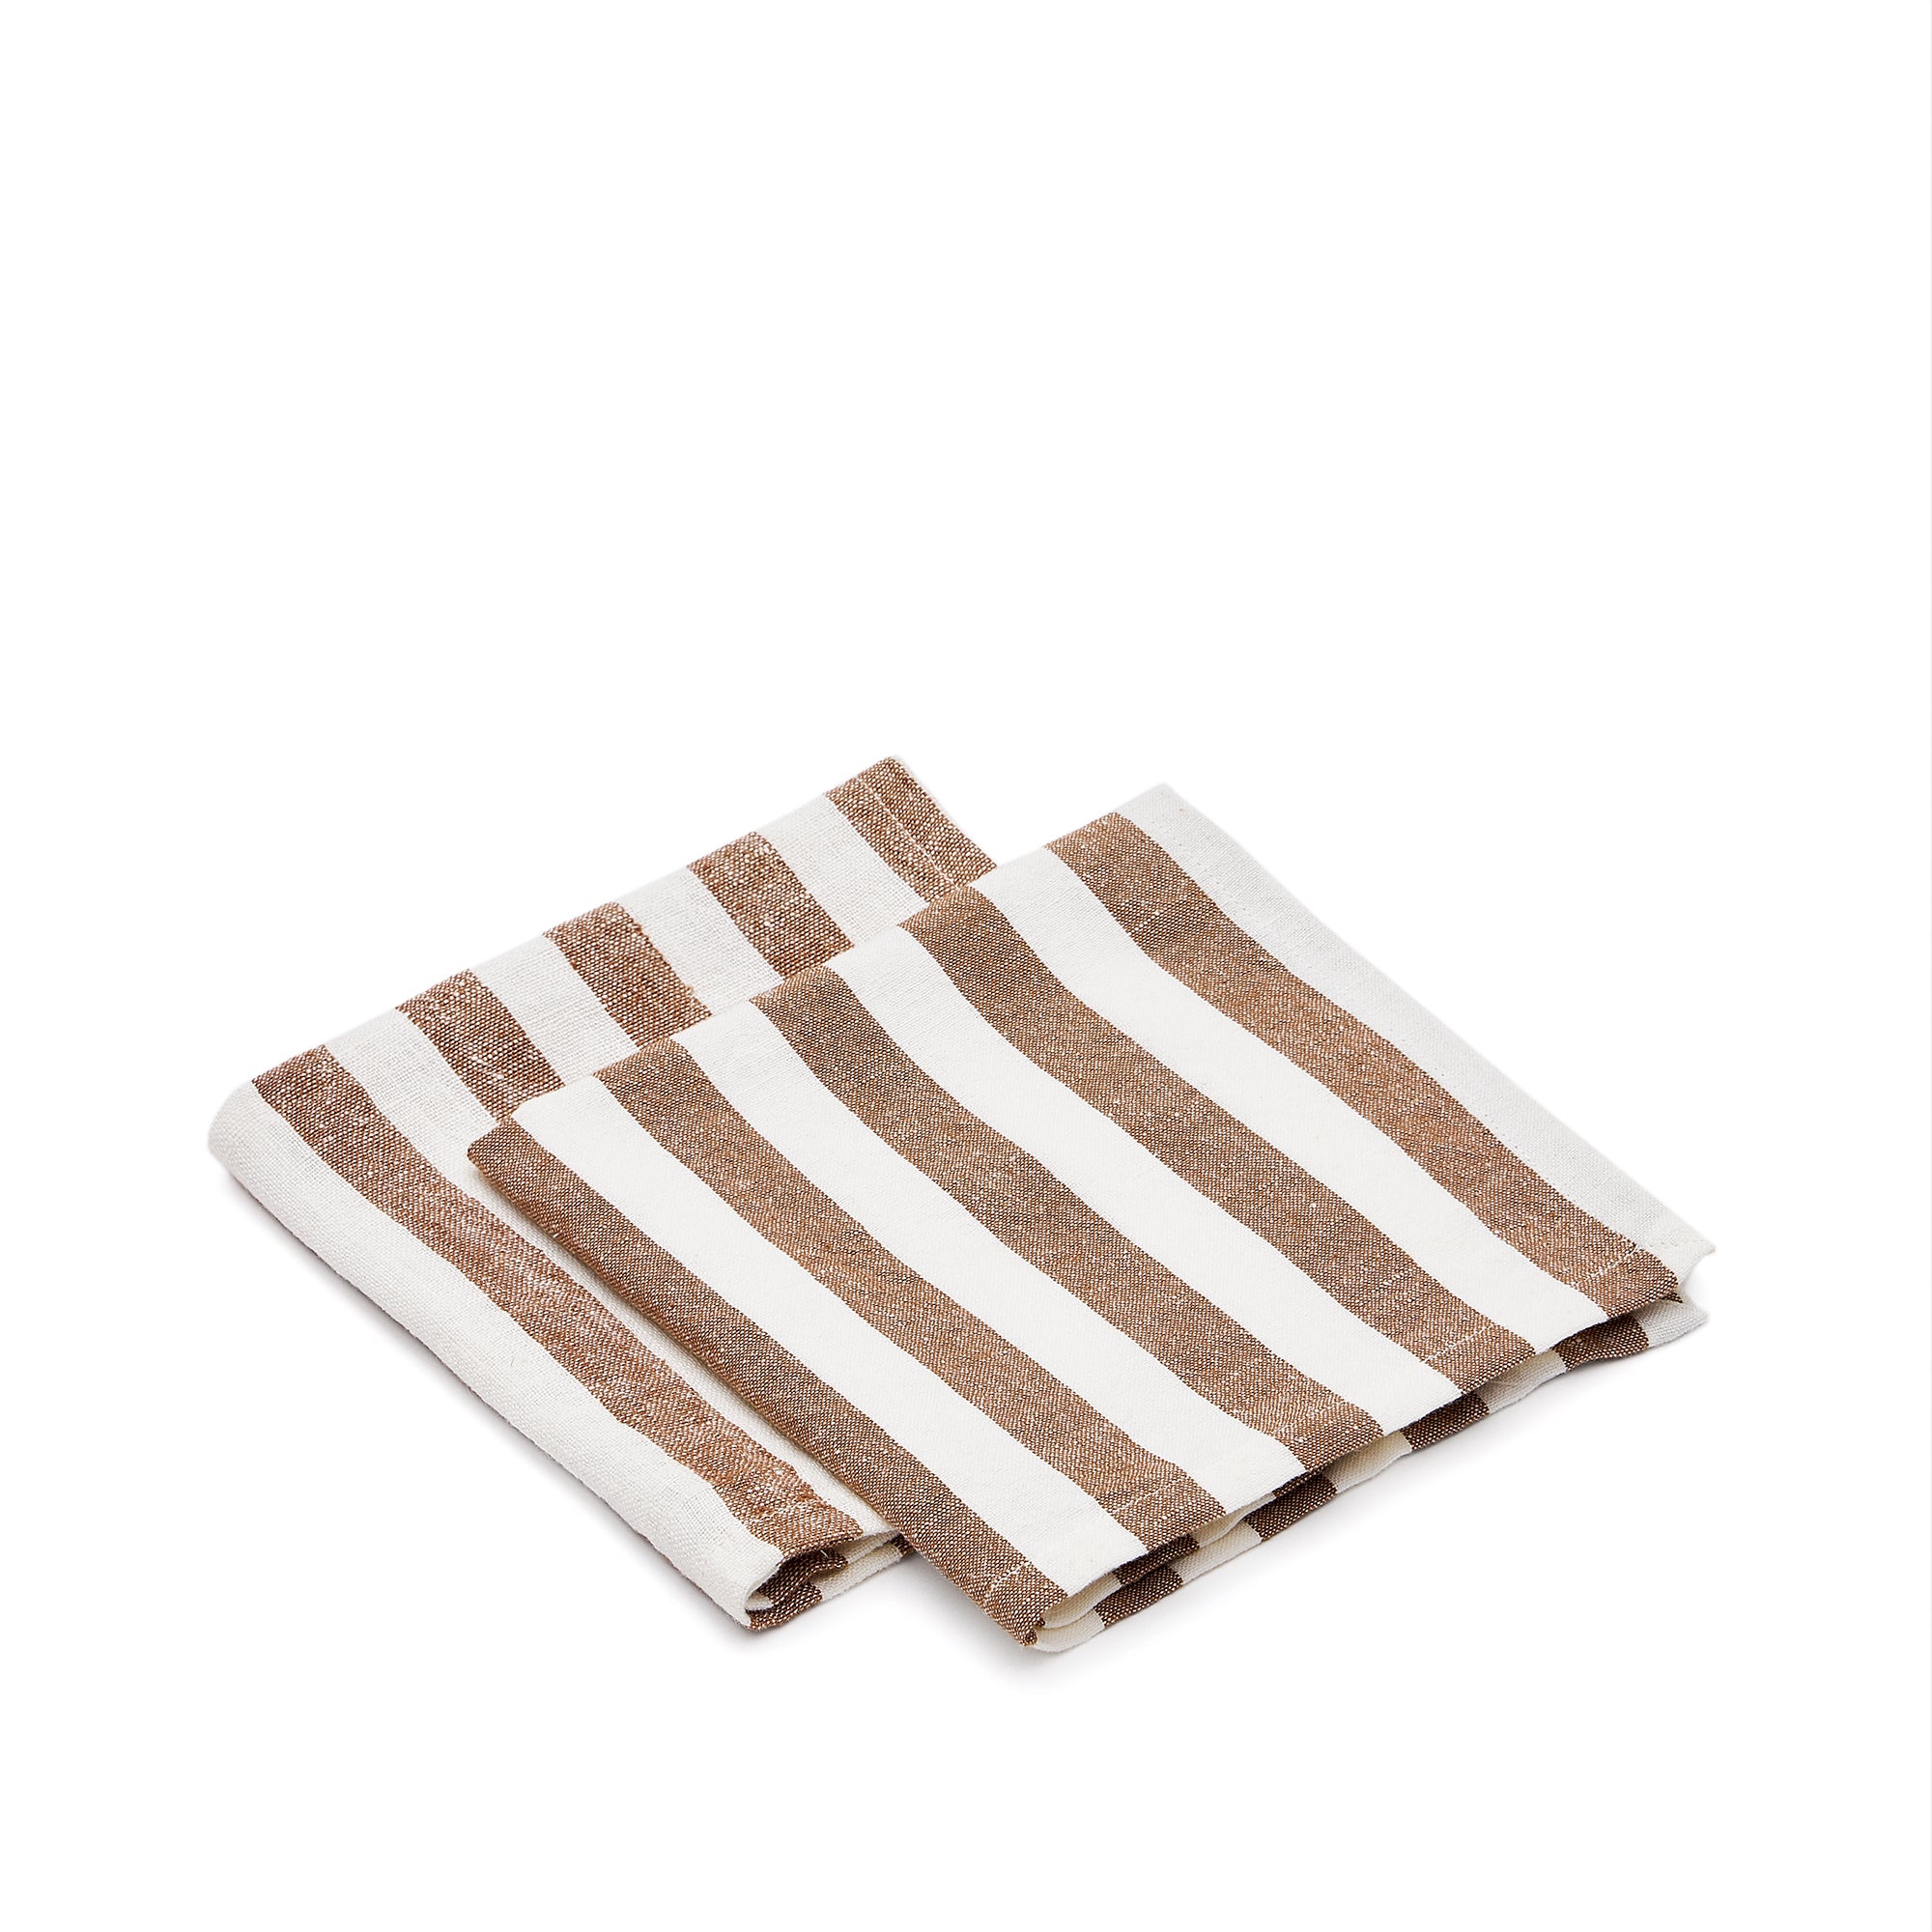 Maura set of 2 cotton and linen napkins with white and brown stripes